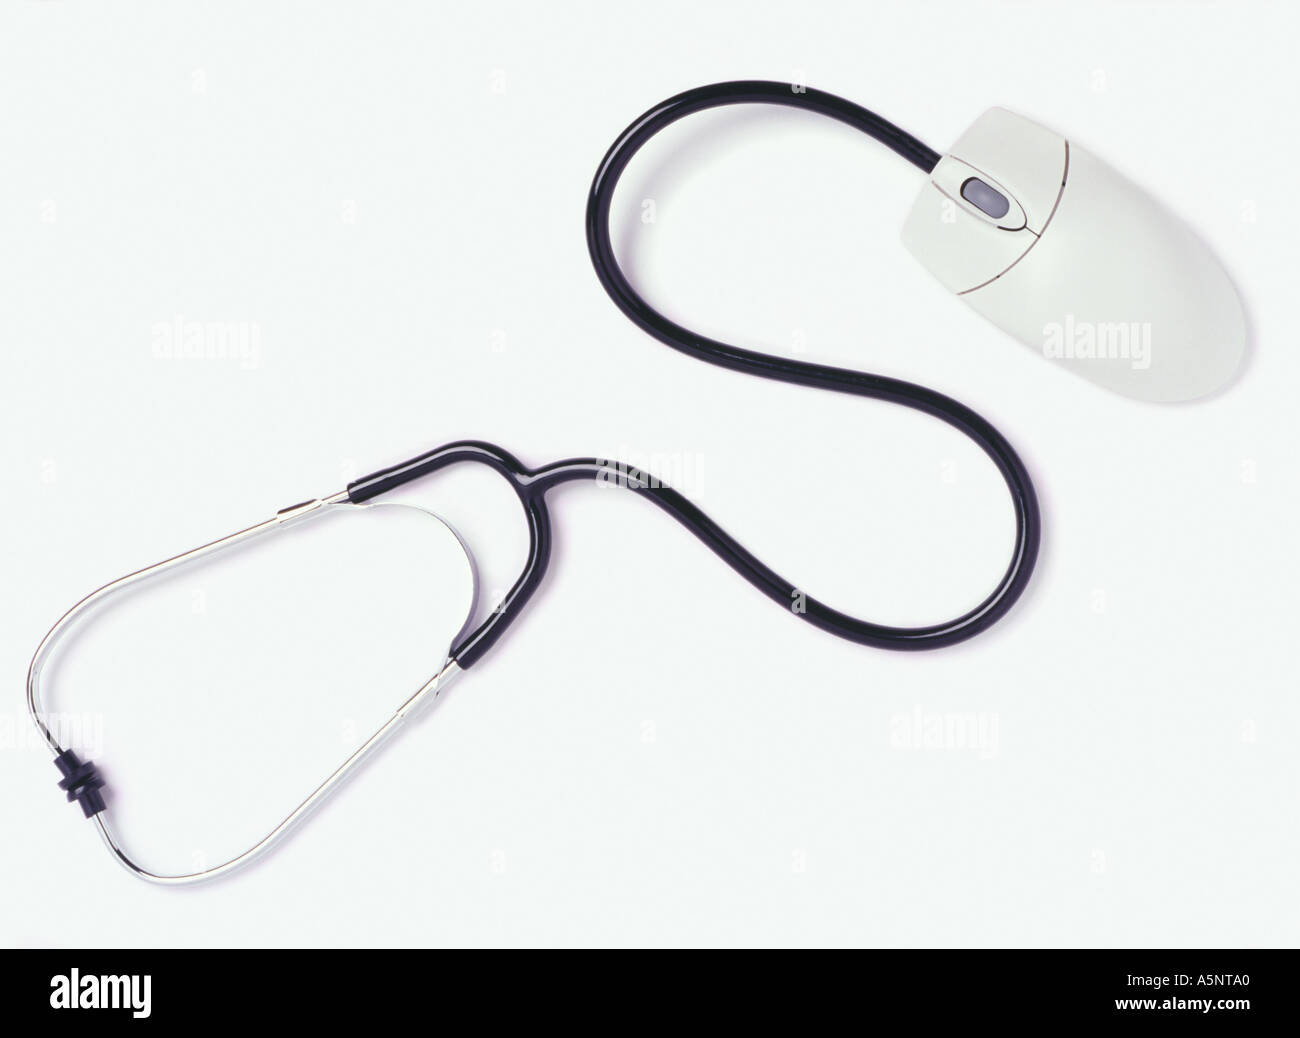 A stethoscope and mouse Stock Photo